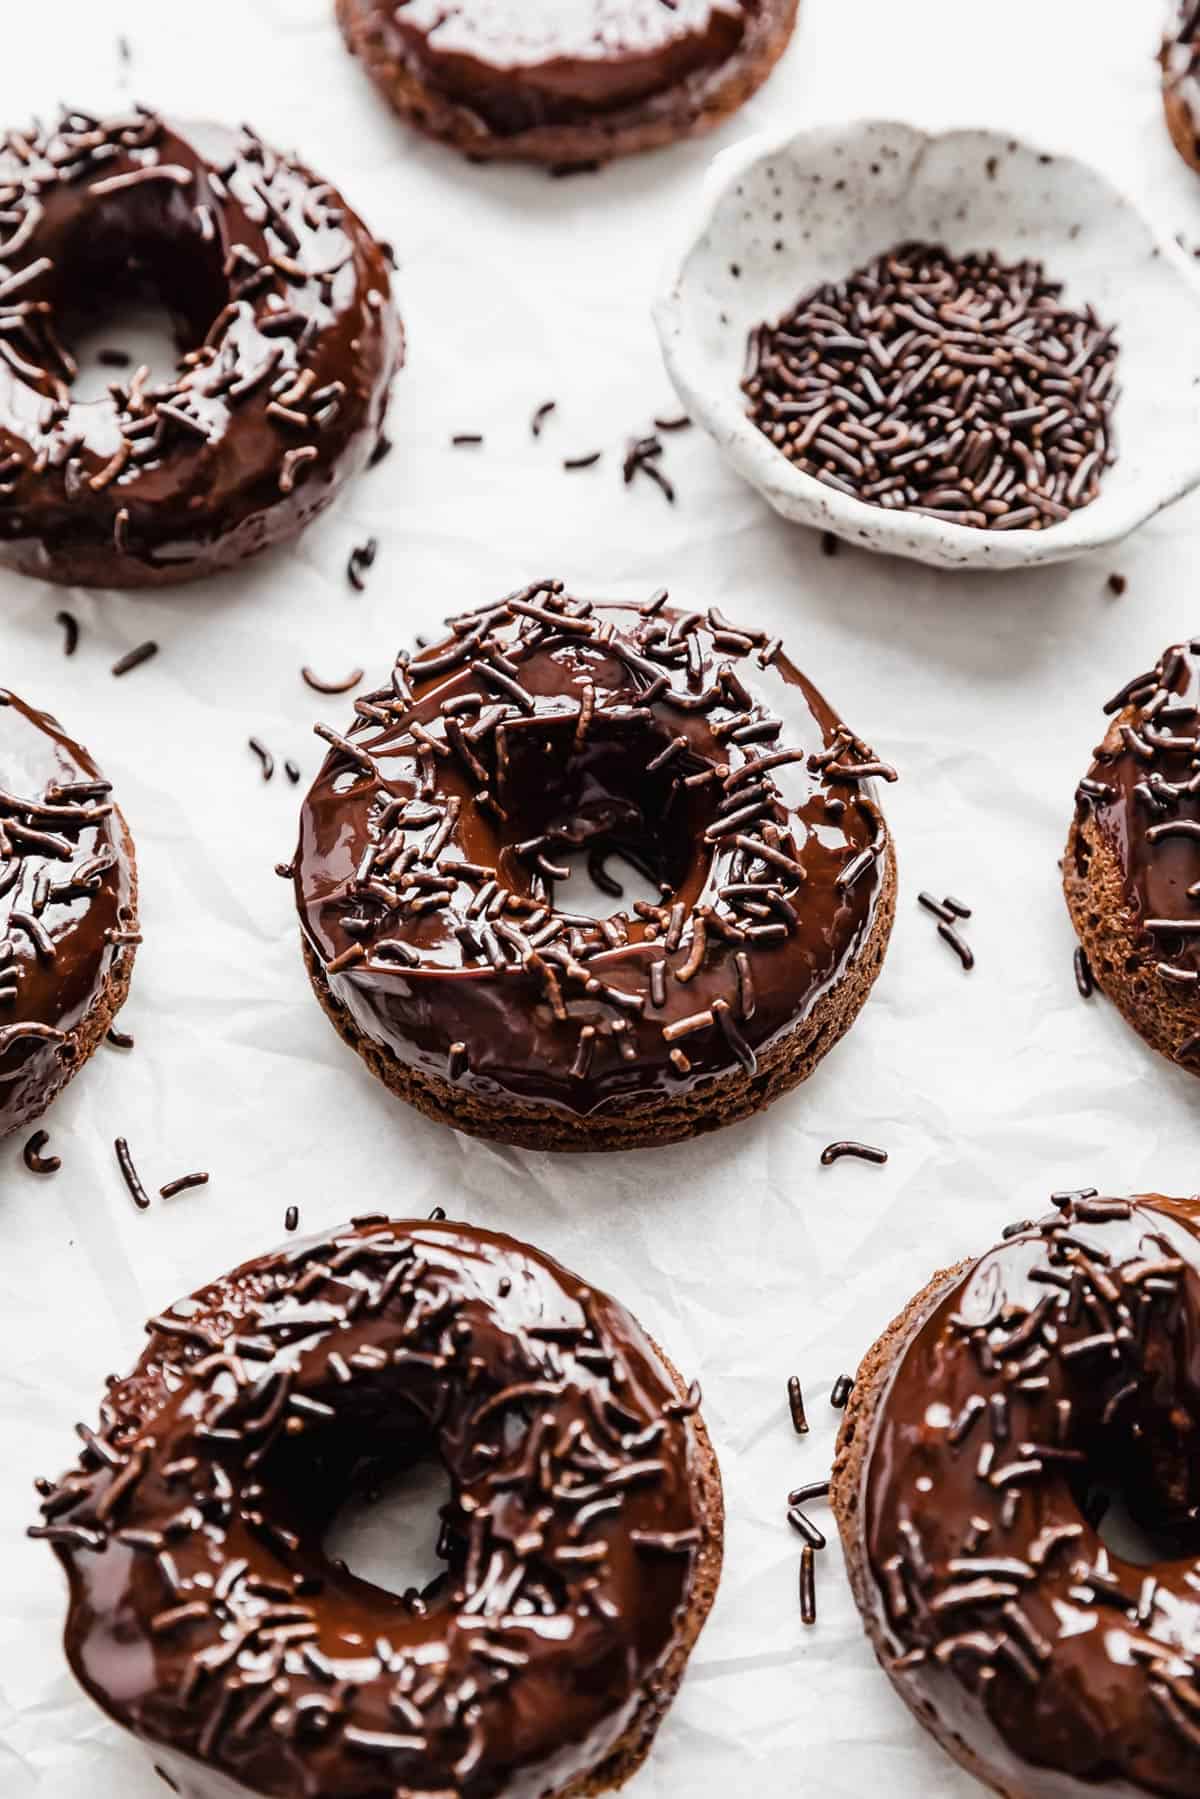 Chocolate Baked Doughnuts topped with a chocolate glaze and chocolate sprinkles.